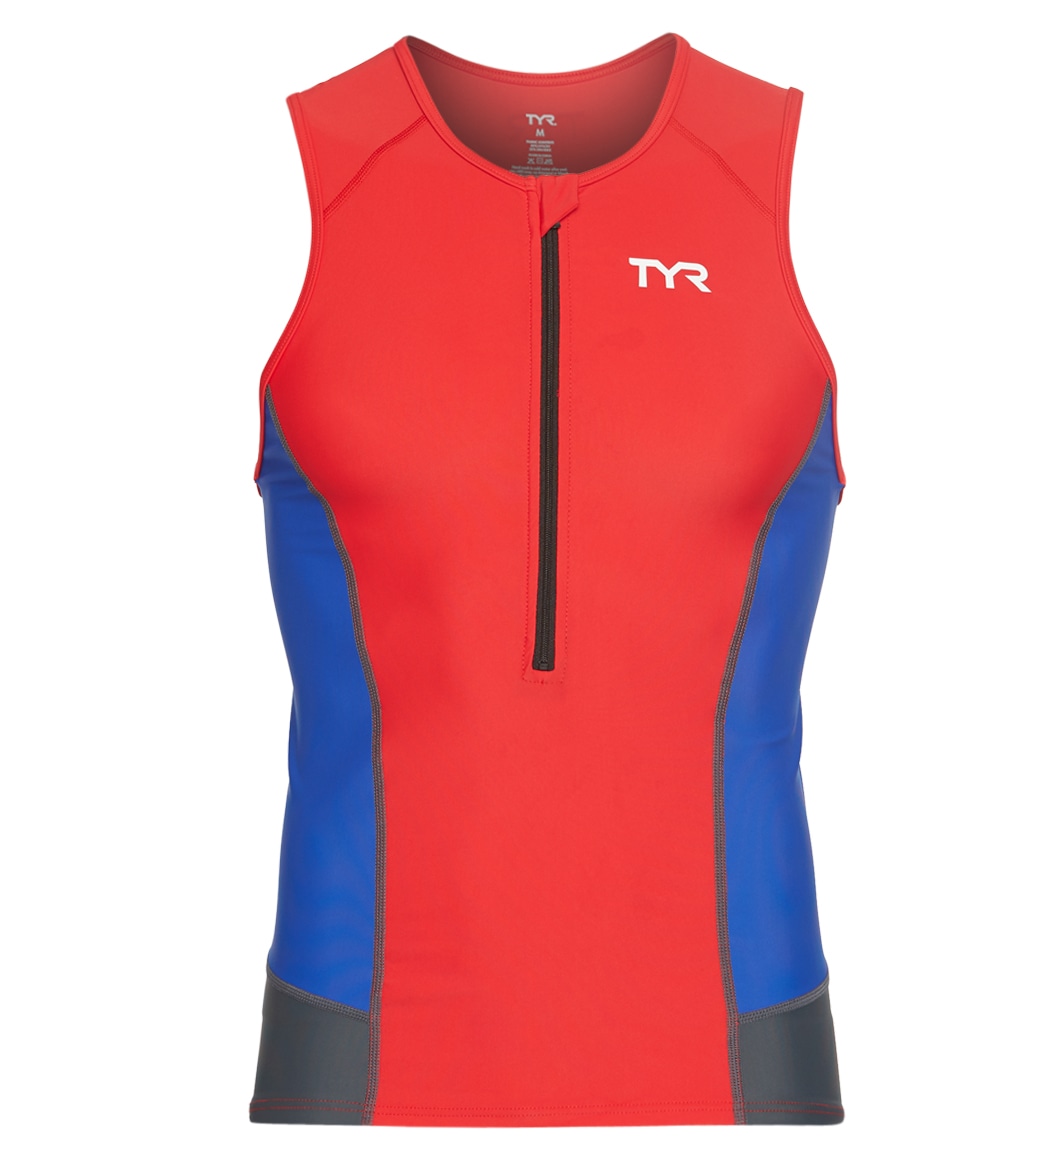 TYR Men's Competitor Singlet - Red/Blue/Grey Xl Size Xl - Swimoutlet.com